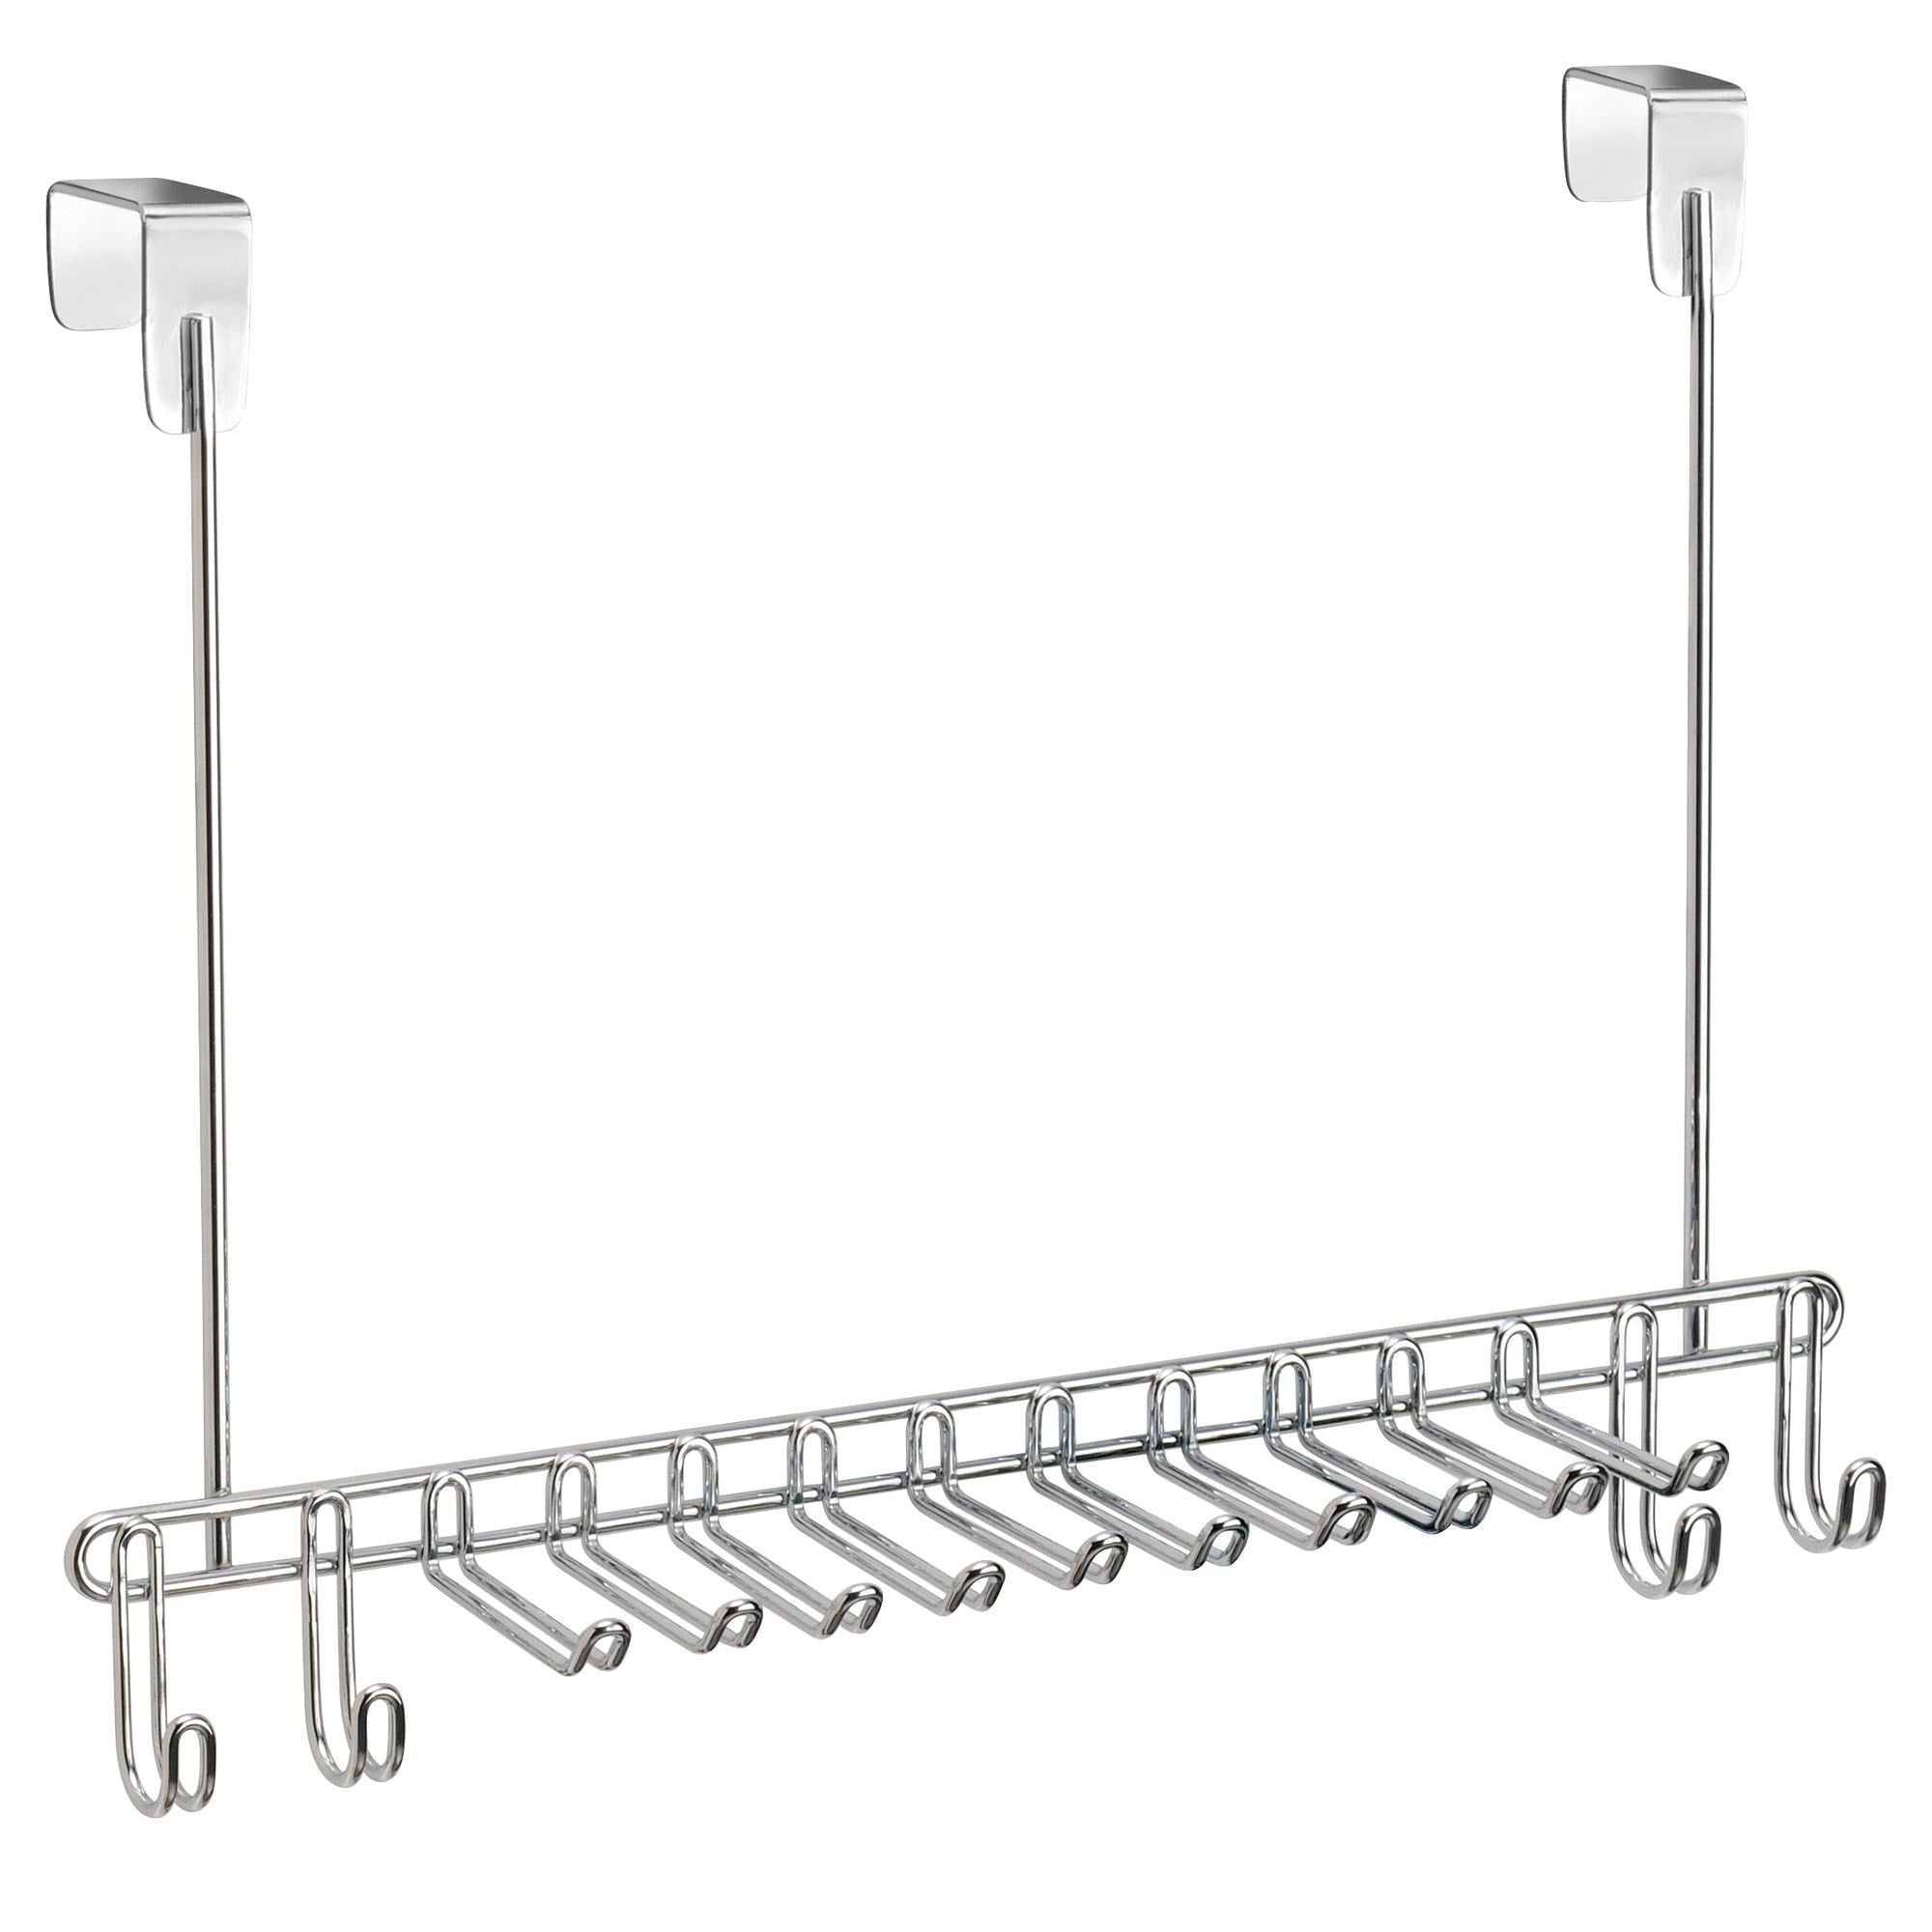 Shop here mdesign metal over door hanging closet storage organizer rack for mens and womens ties belts slim scarves accessories jewelry 4 hooks and 10 vertical arms on each 2 pack chrome 1